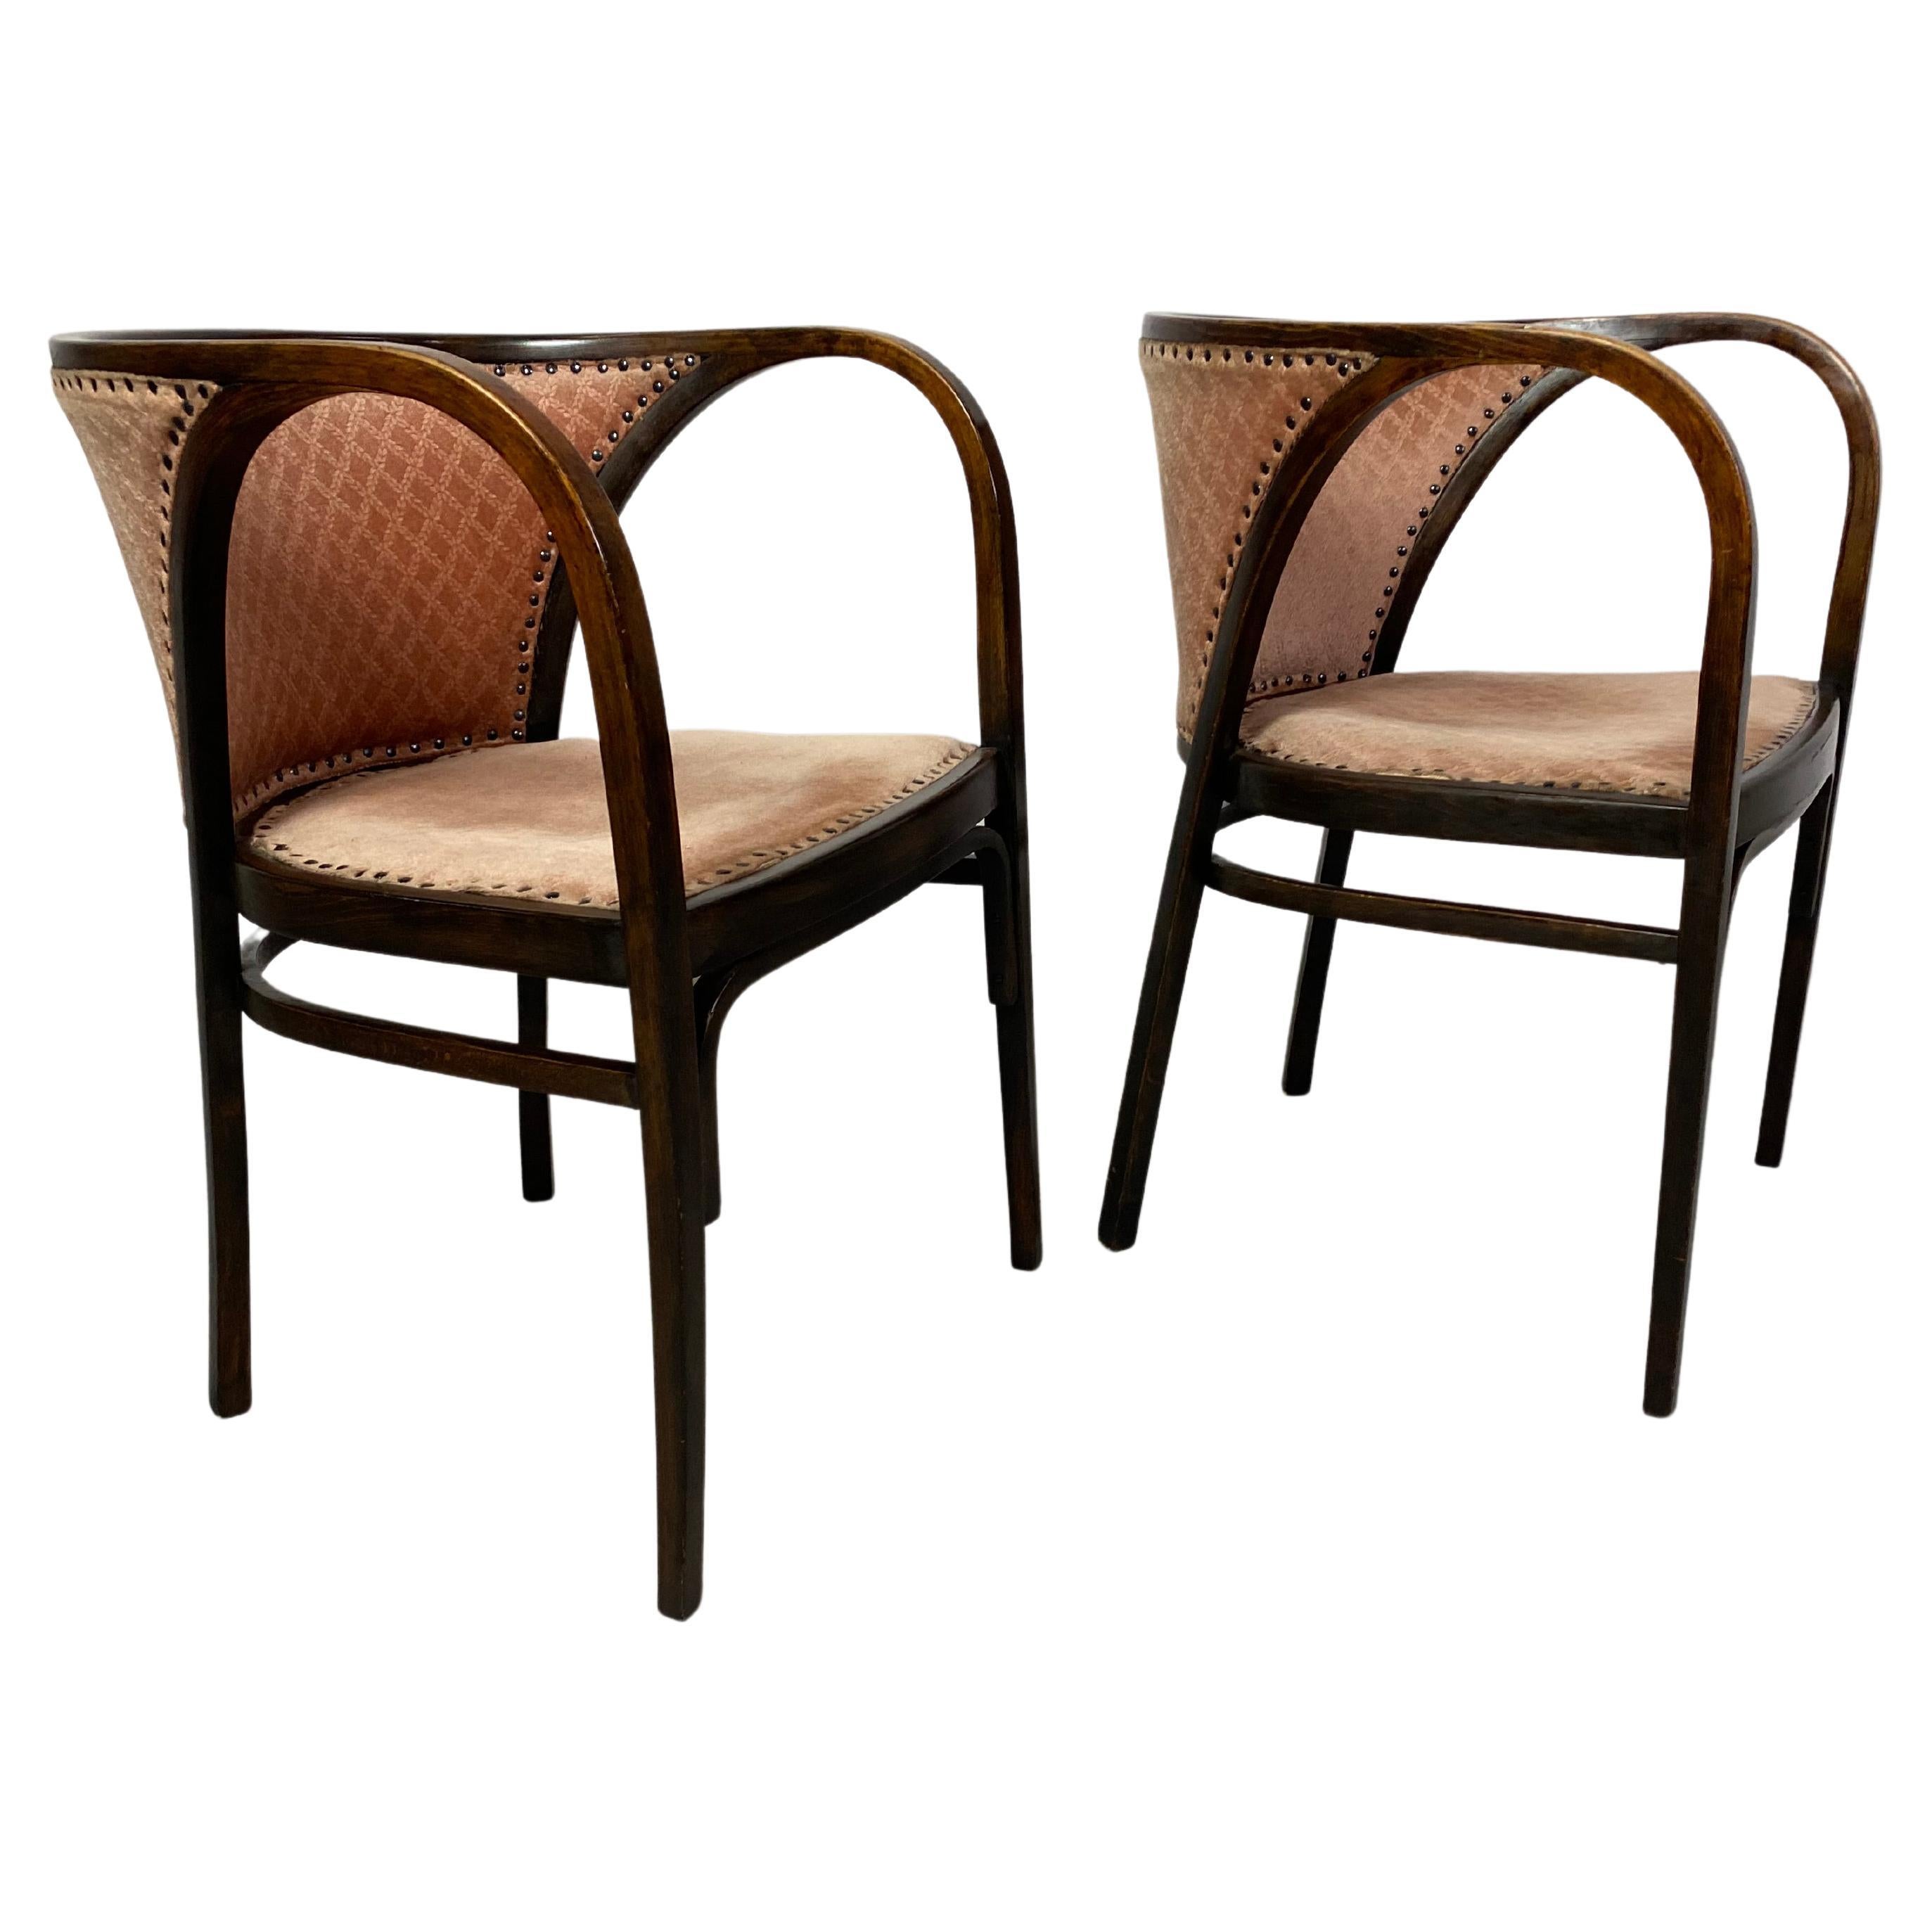 Thonet Club Chairs No.6517 by Marcel Kammerer for Thonet